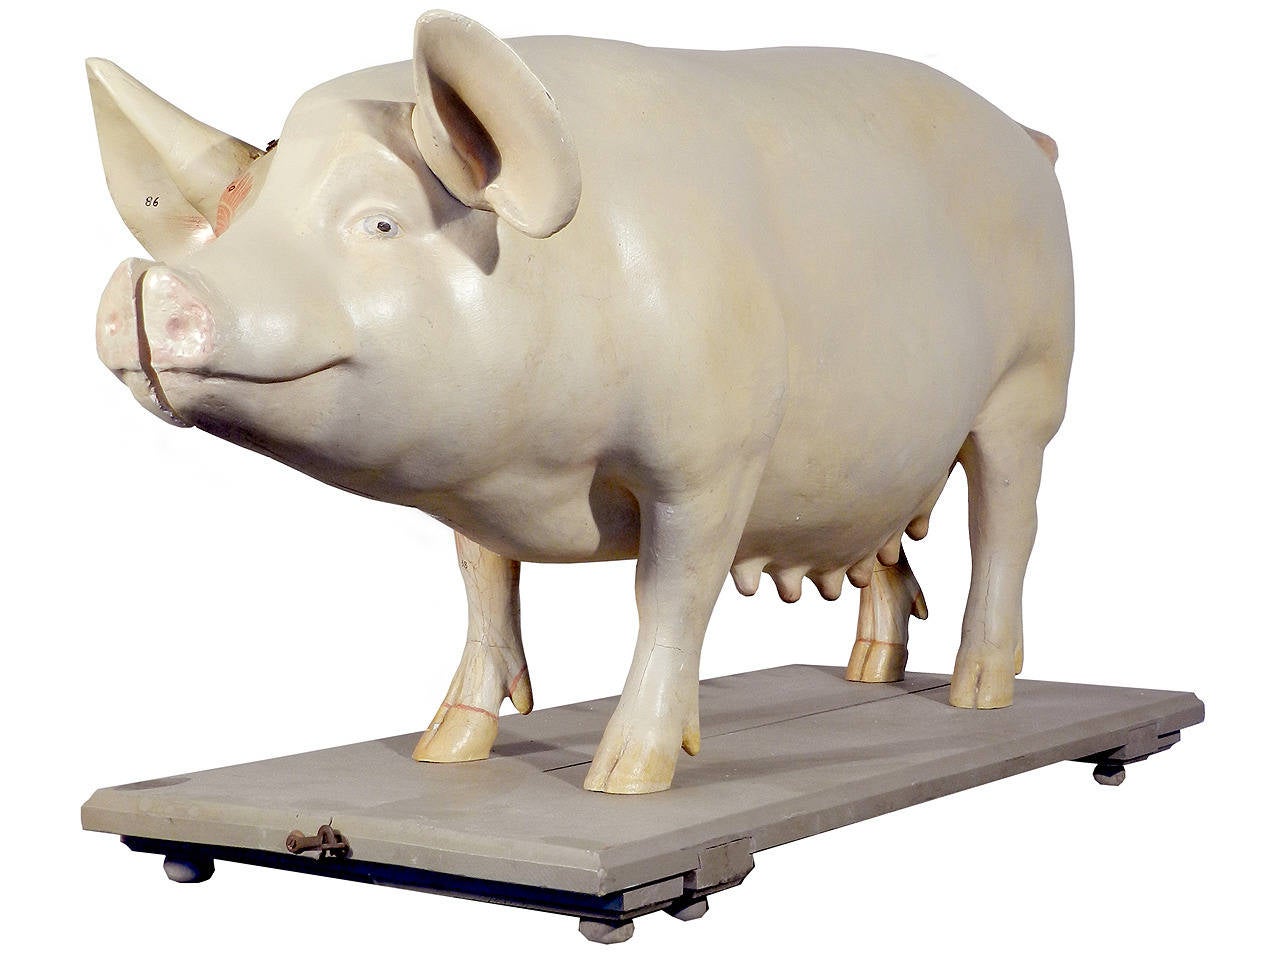 Life Size Anatomical Model of Pig, Germany 2